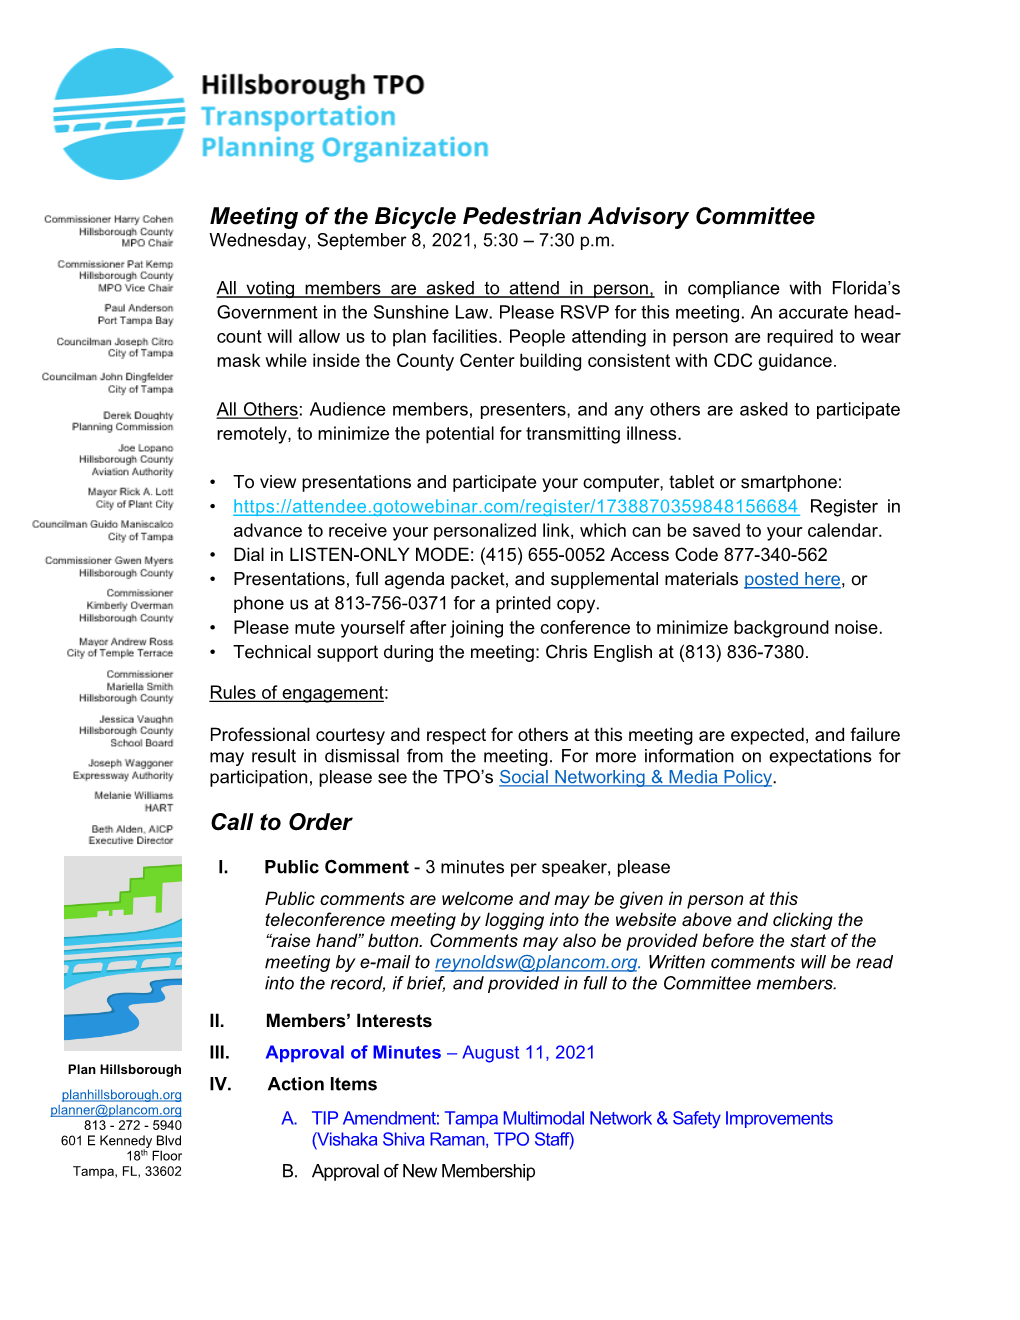 Meeting of the Bicycle Pedestrian Advisory Committee Call to Order